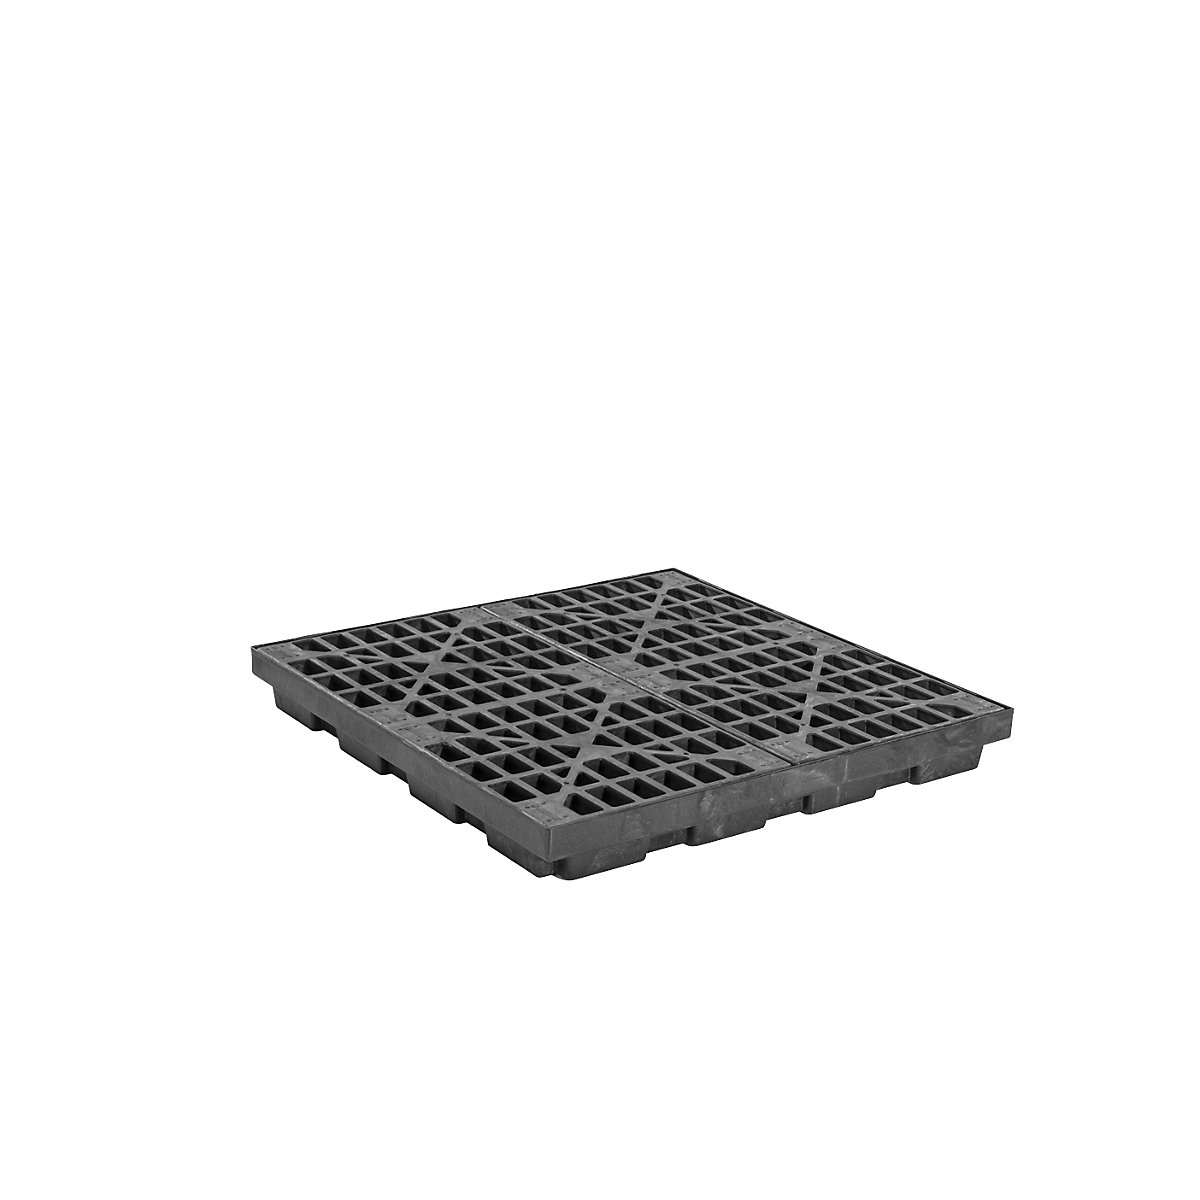 PE sump tray made of recycled PE - Justrite